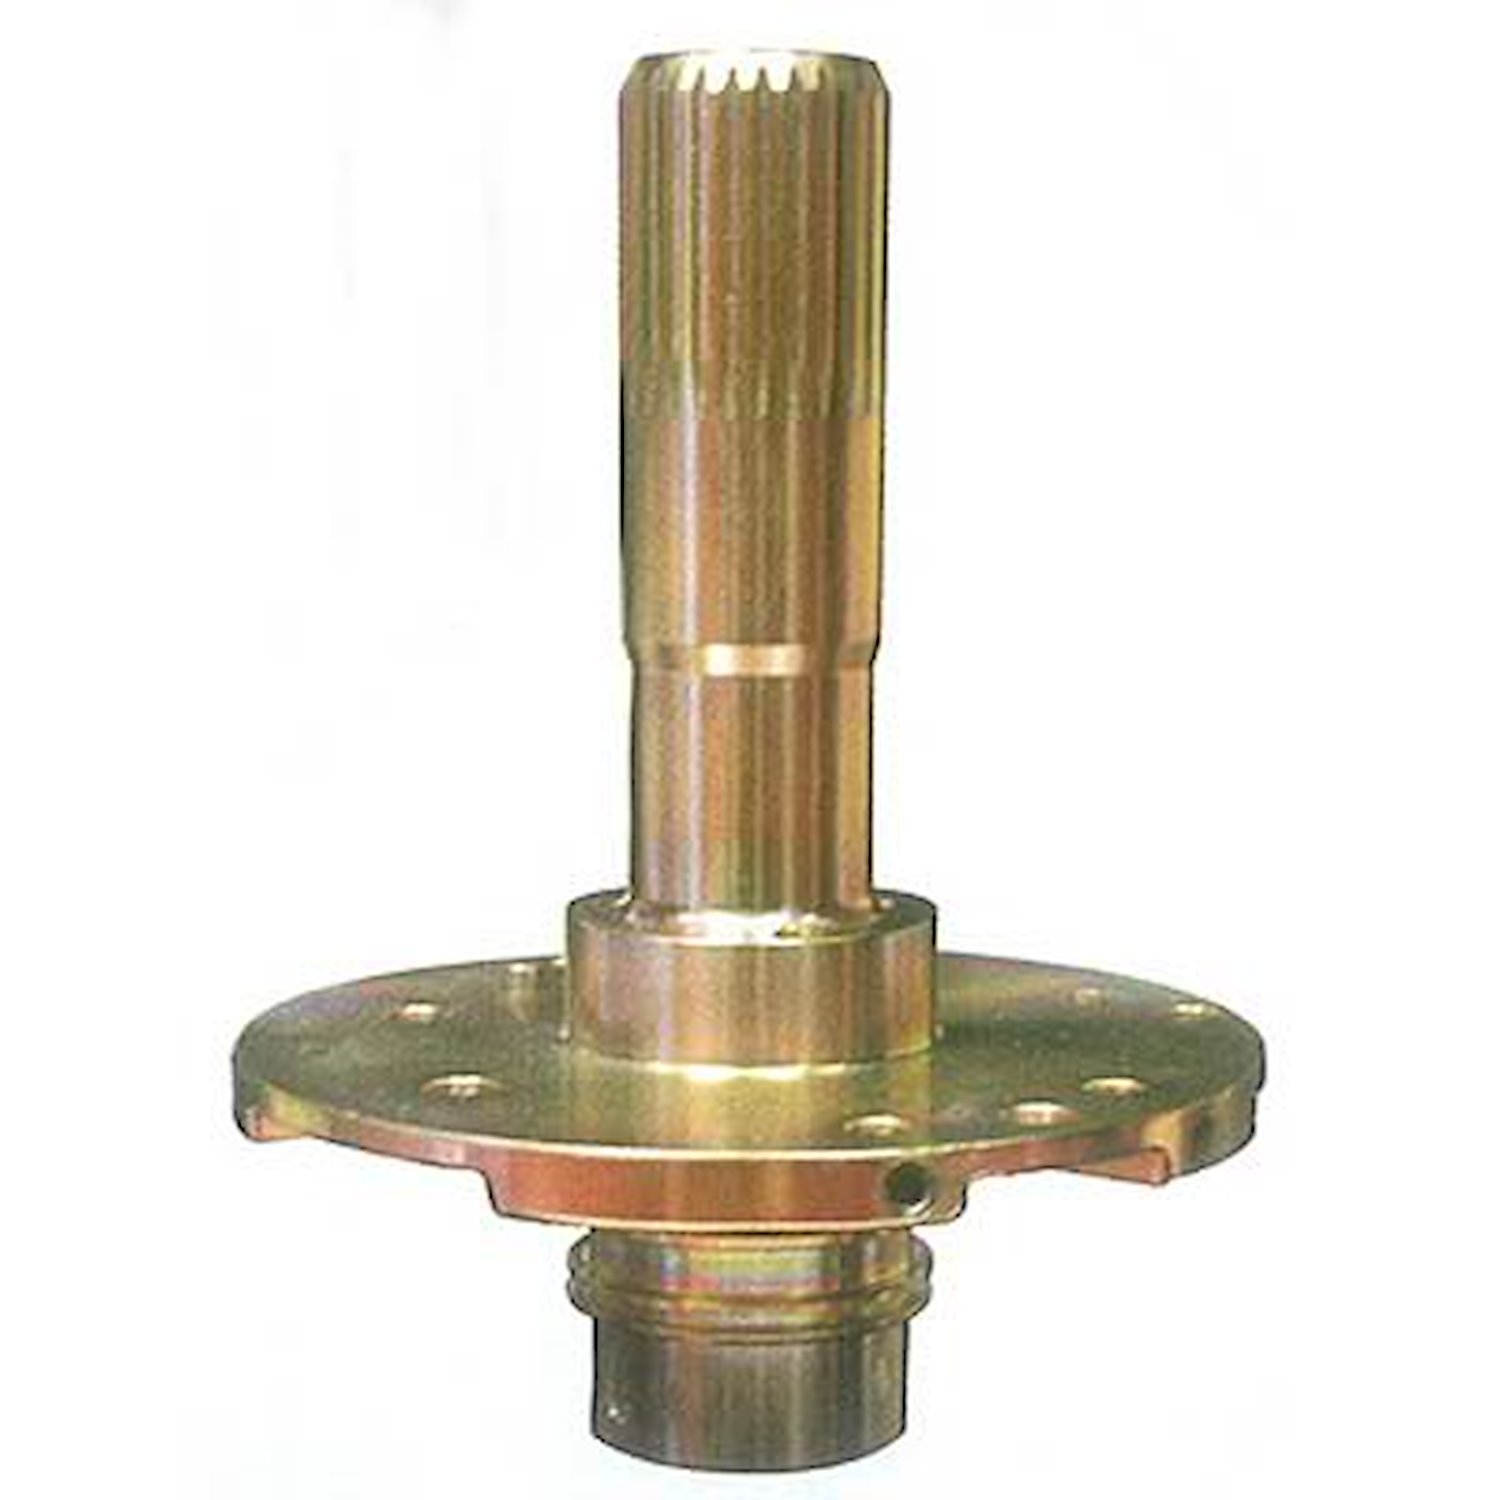 205210 Stator Support Tubes And Pump Halves, Heat Treated, 4140 - OEM Style "Press In"